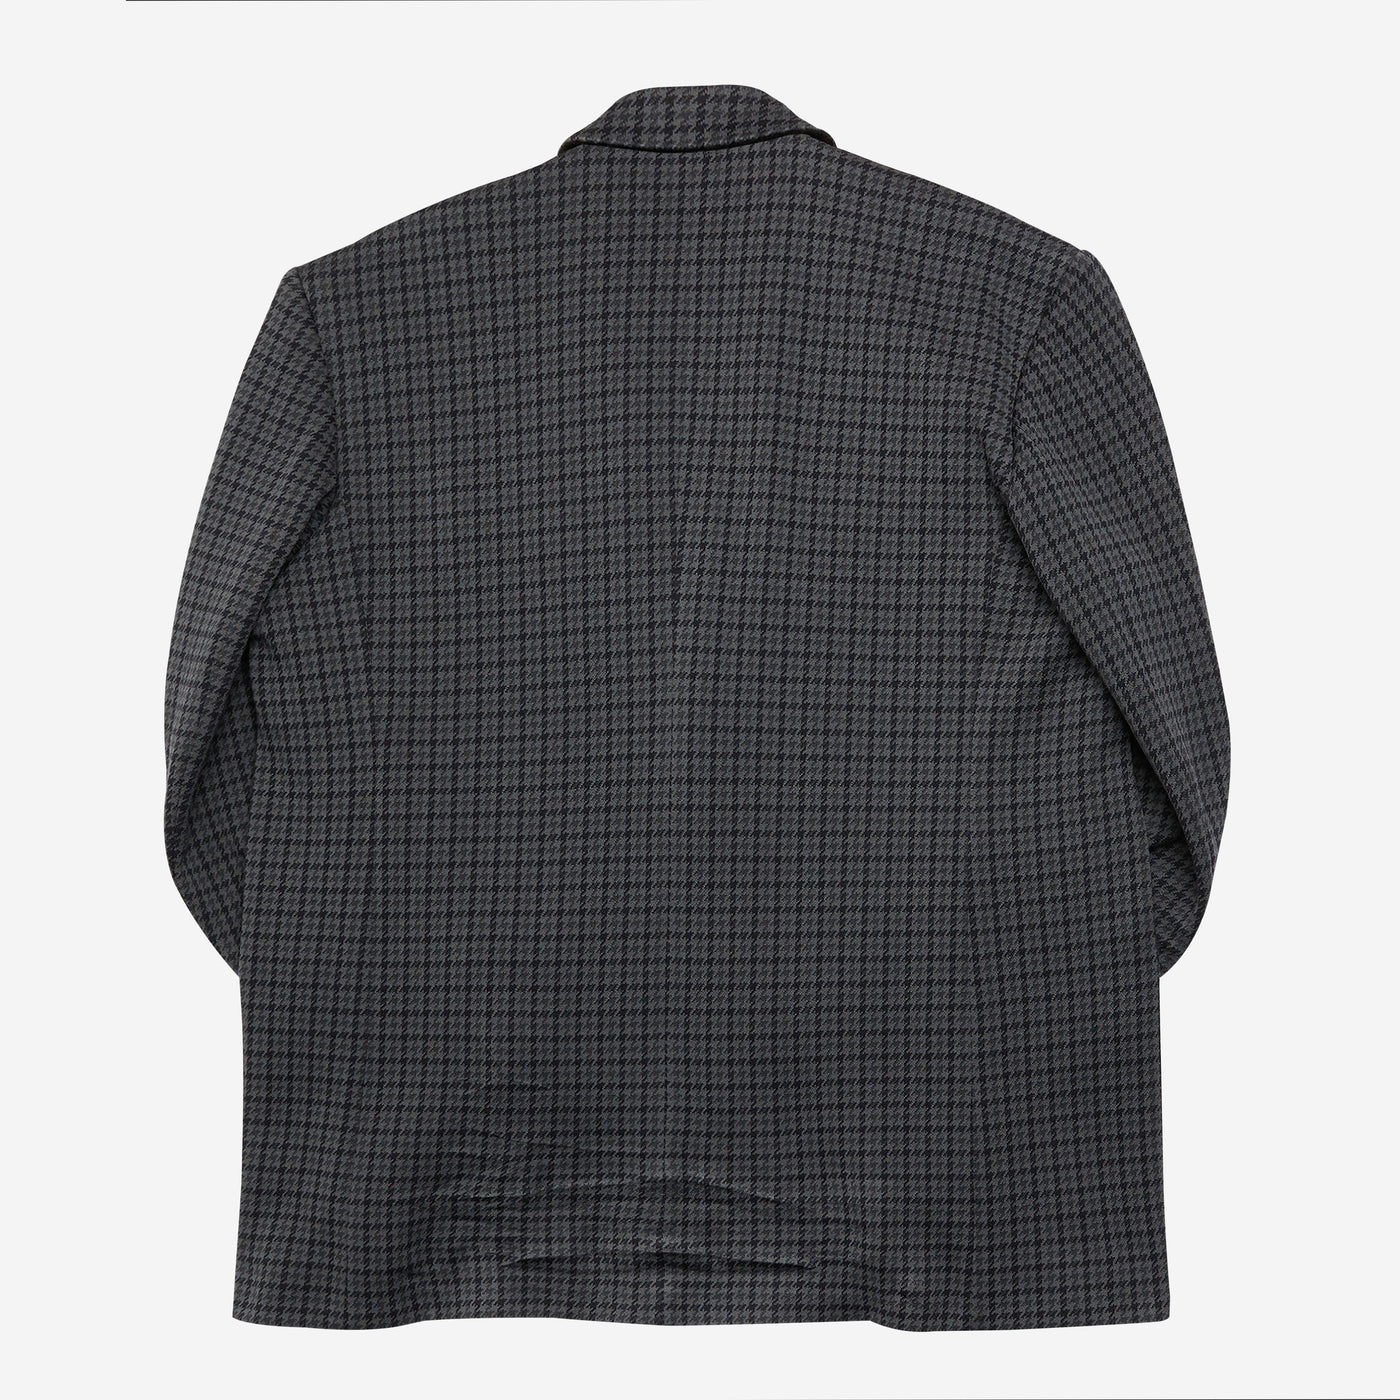 Balenciaga Tailored Knitted Houndstooth Jacket